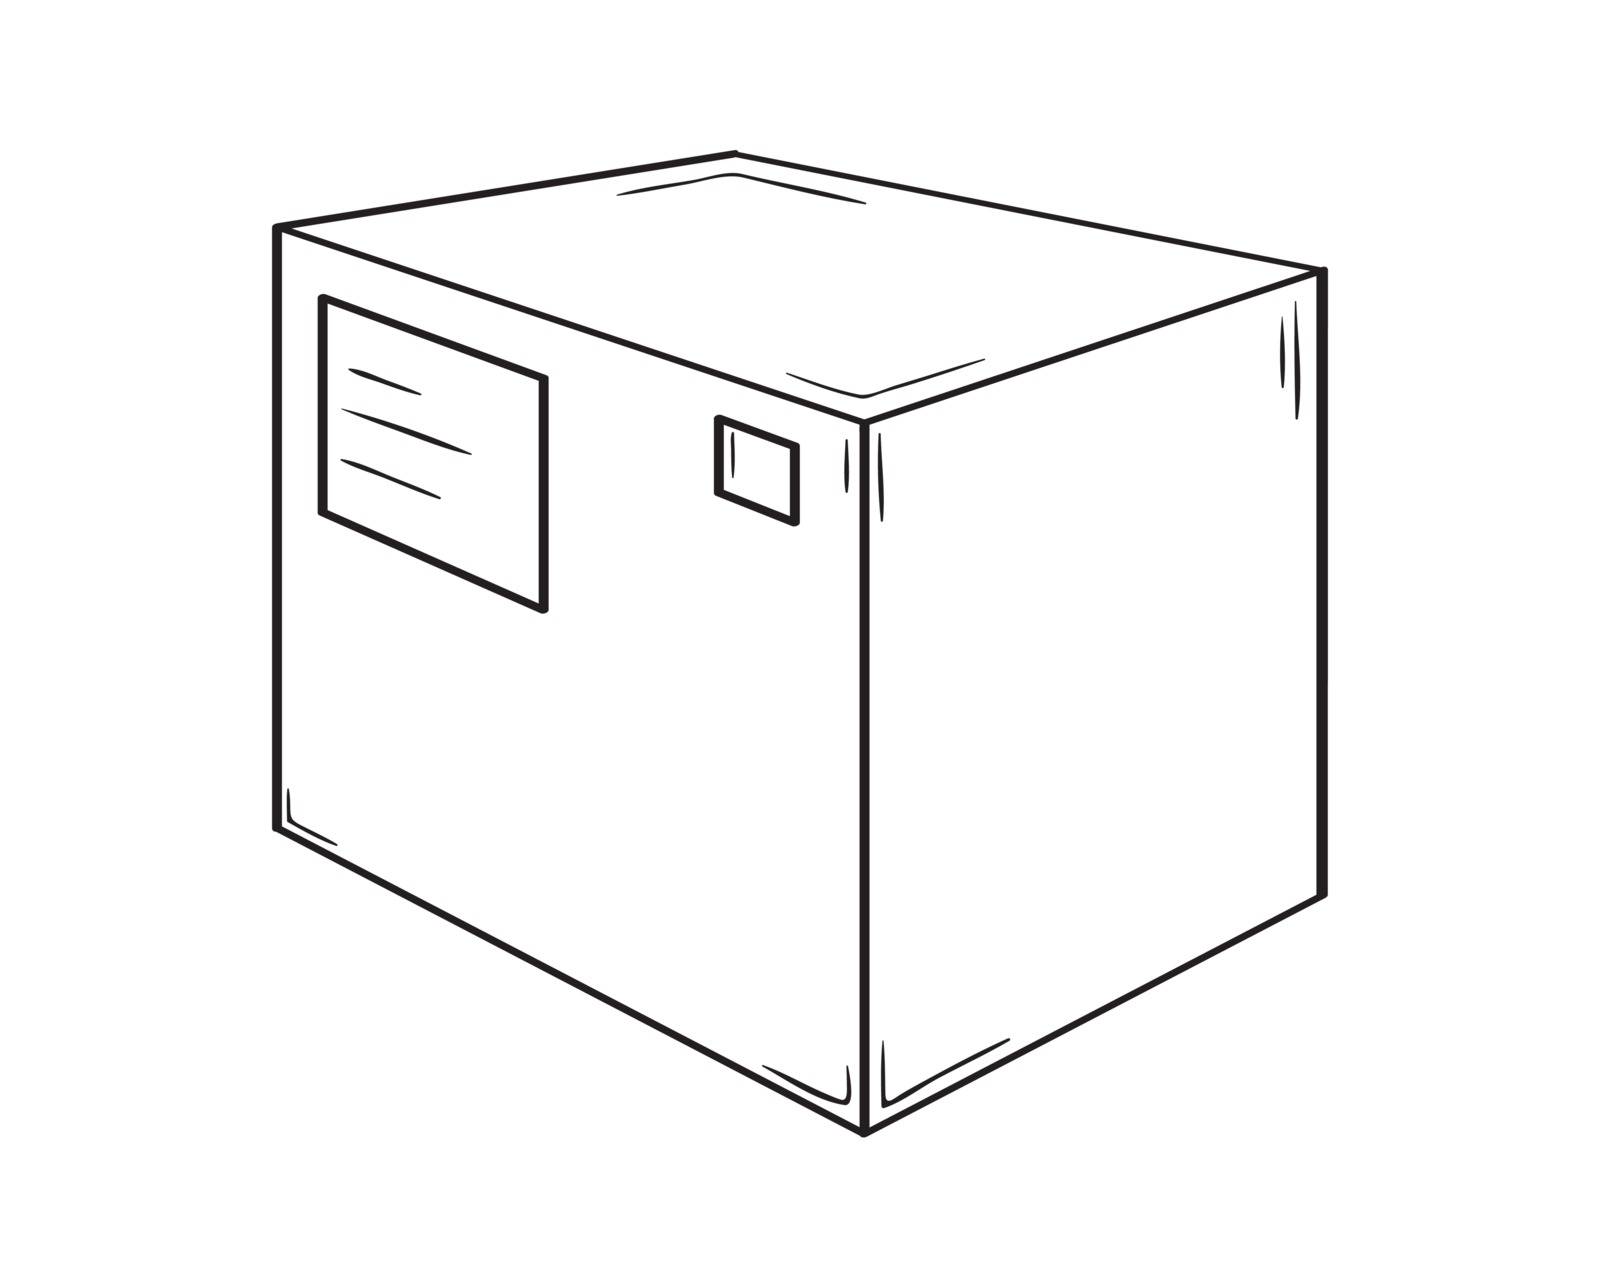 Small closed box. Sketch of the paper or cardboard package with address ticket and post mark.